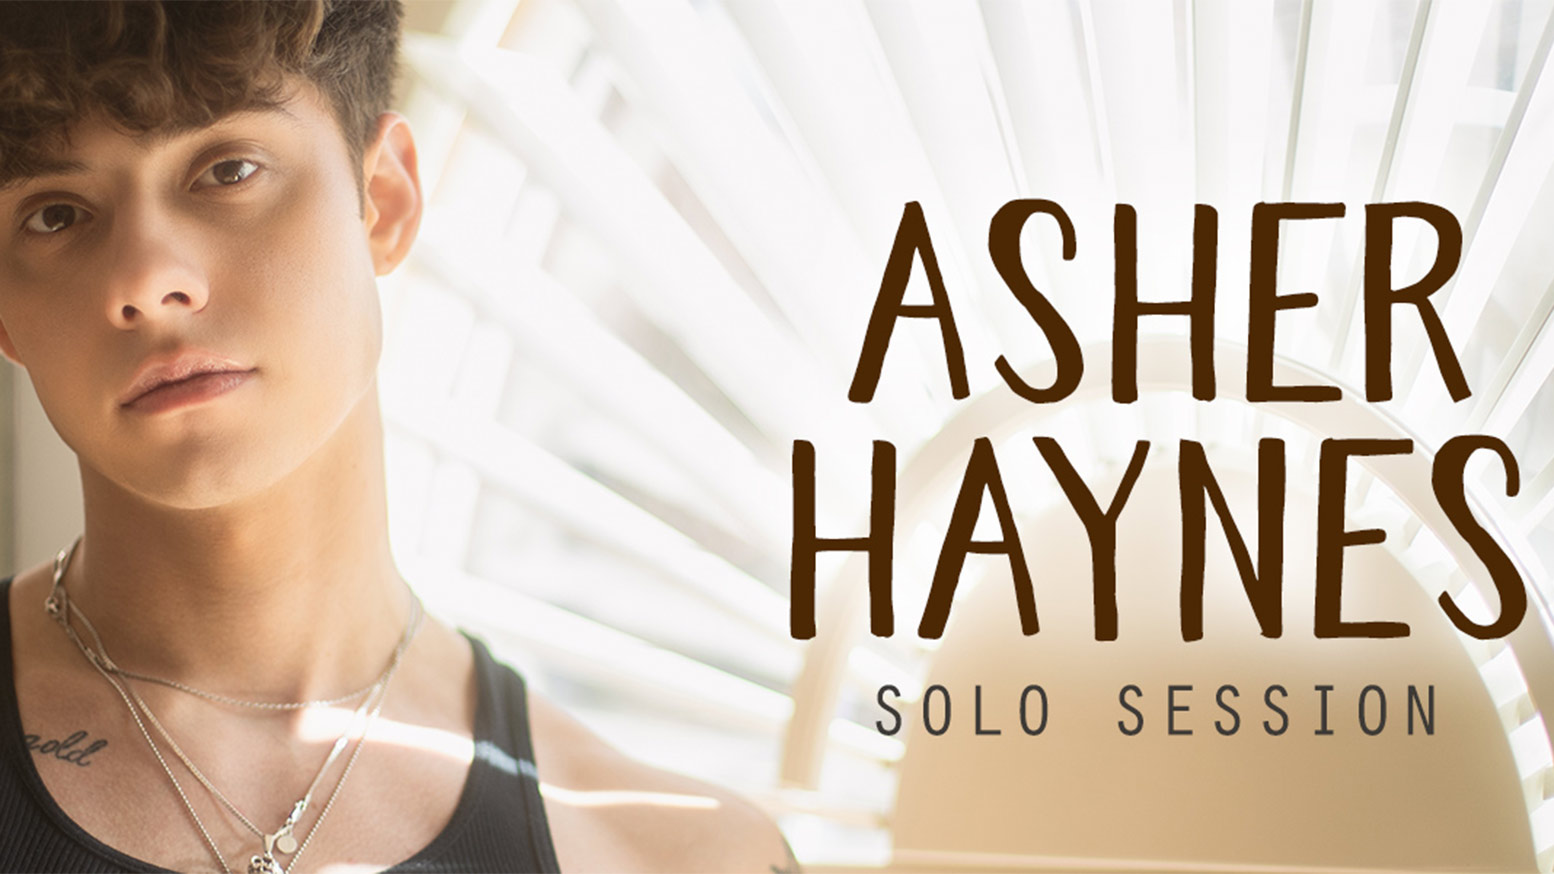 Asher Haynes Solo Session